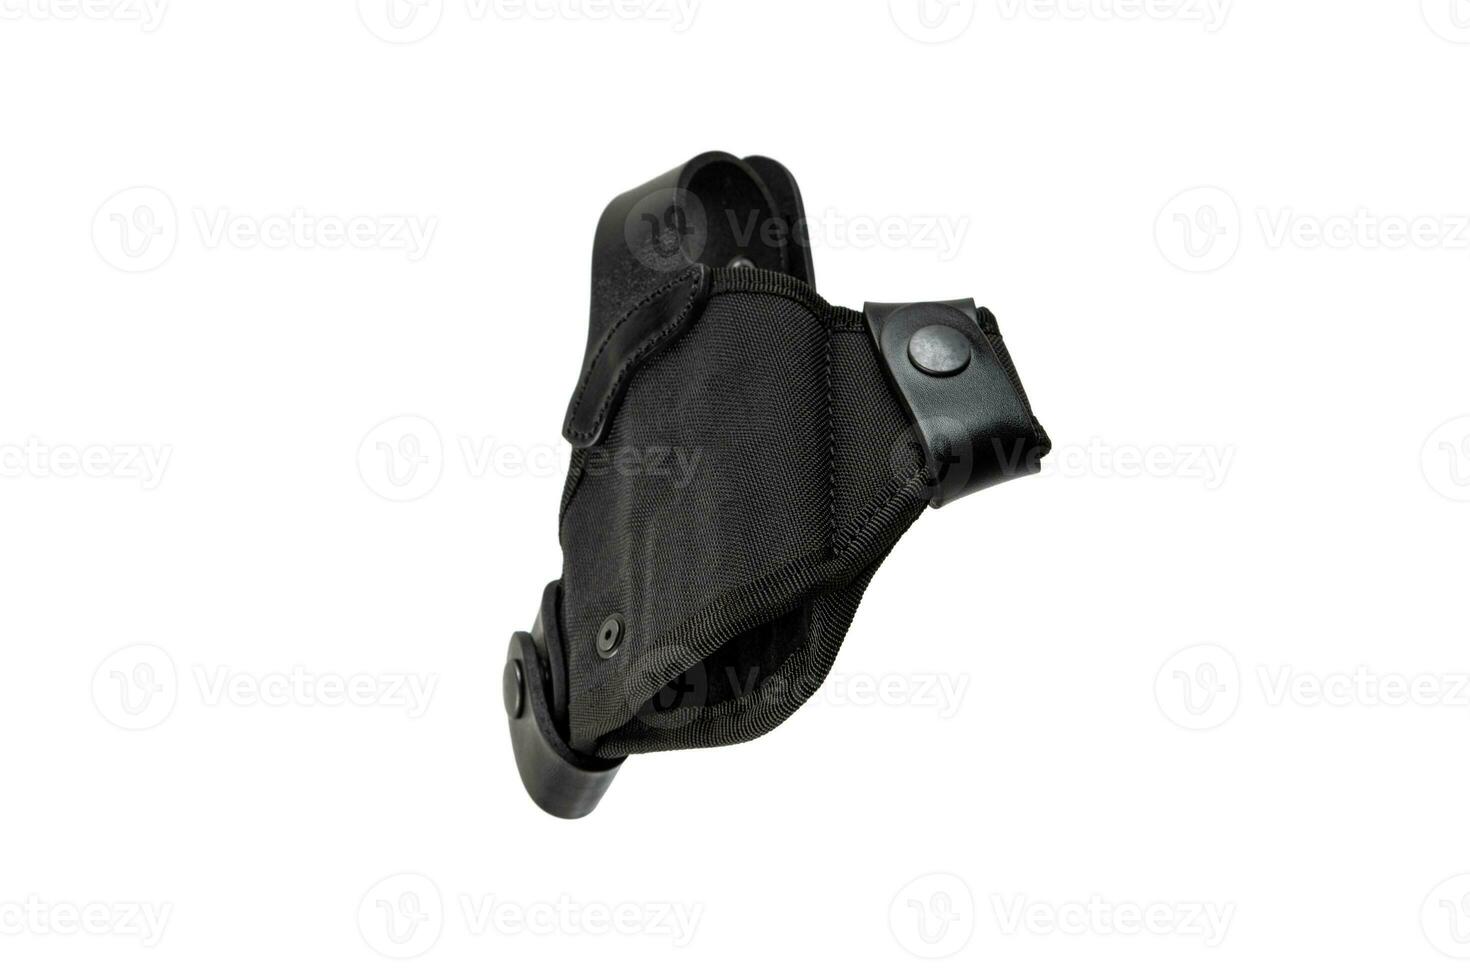 Holster for a pistol. Accessory for convenient and concealed carrying of weapons. Holster made of synthetic material and leather. View from all sides. Isolate on a white back photo